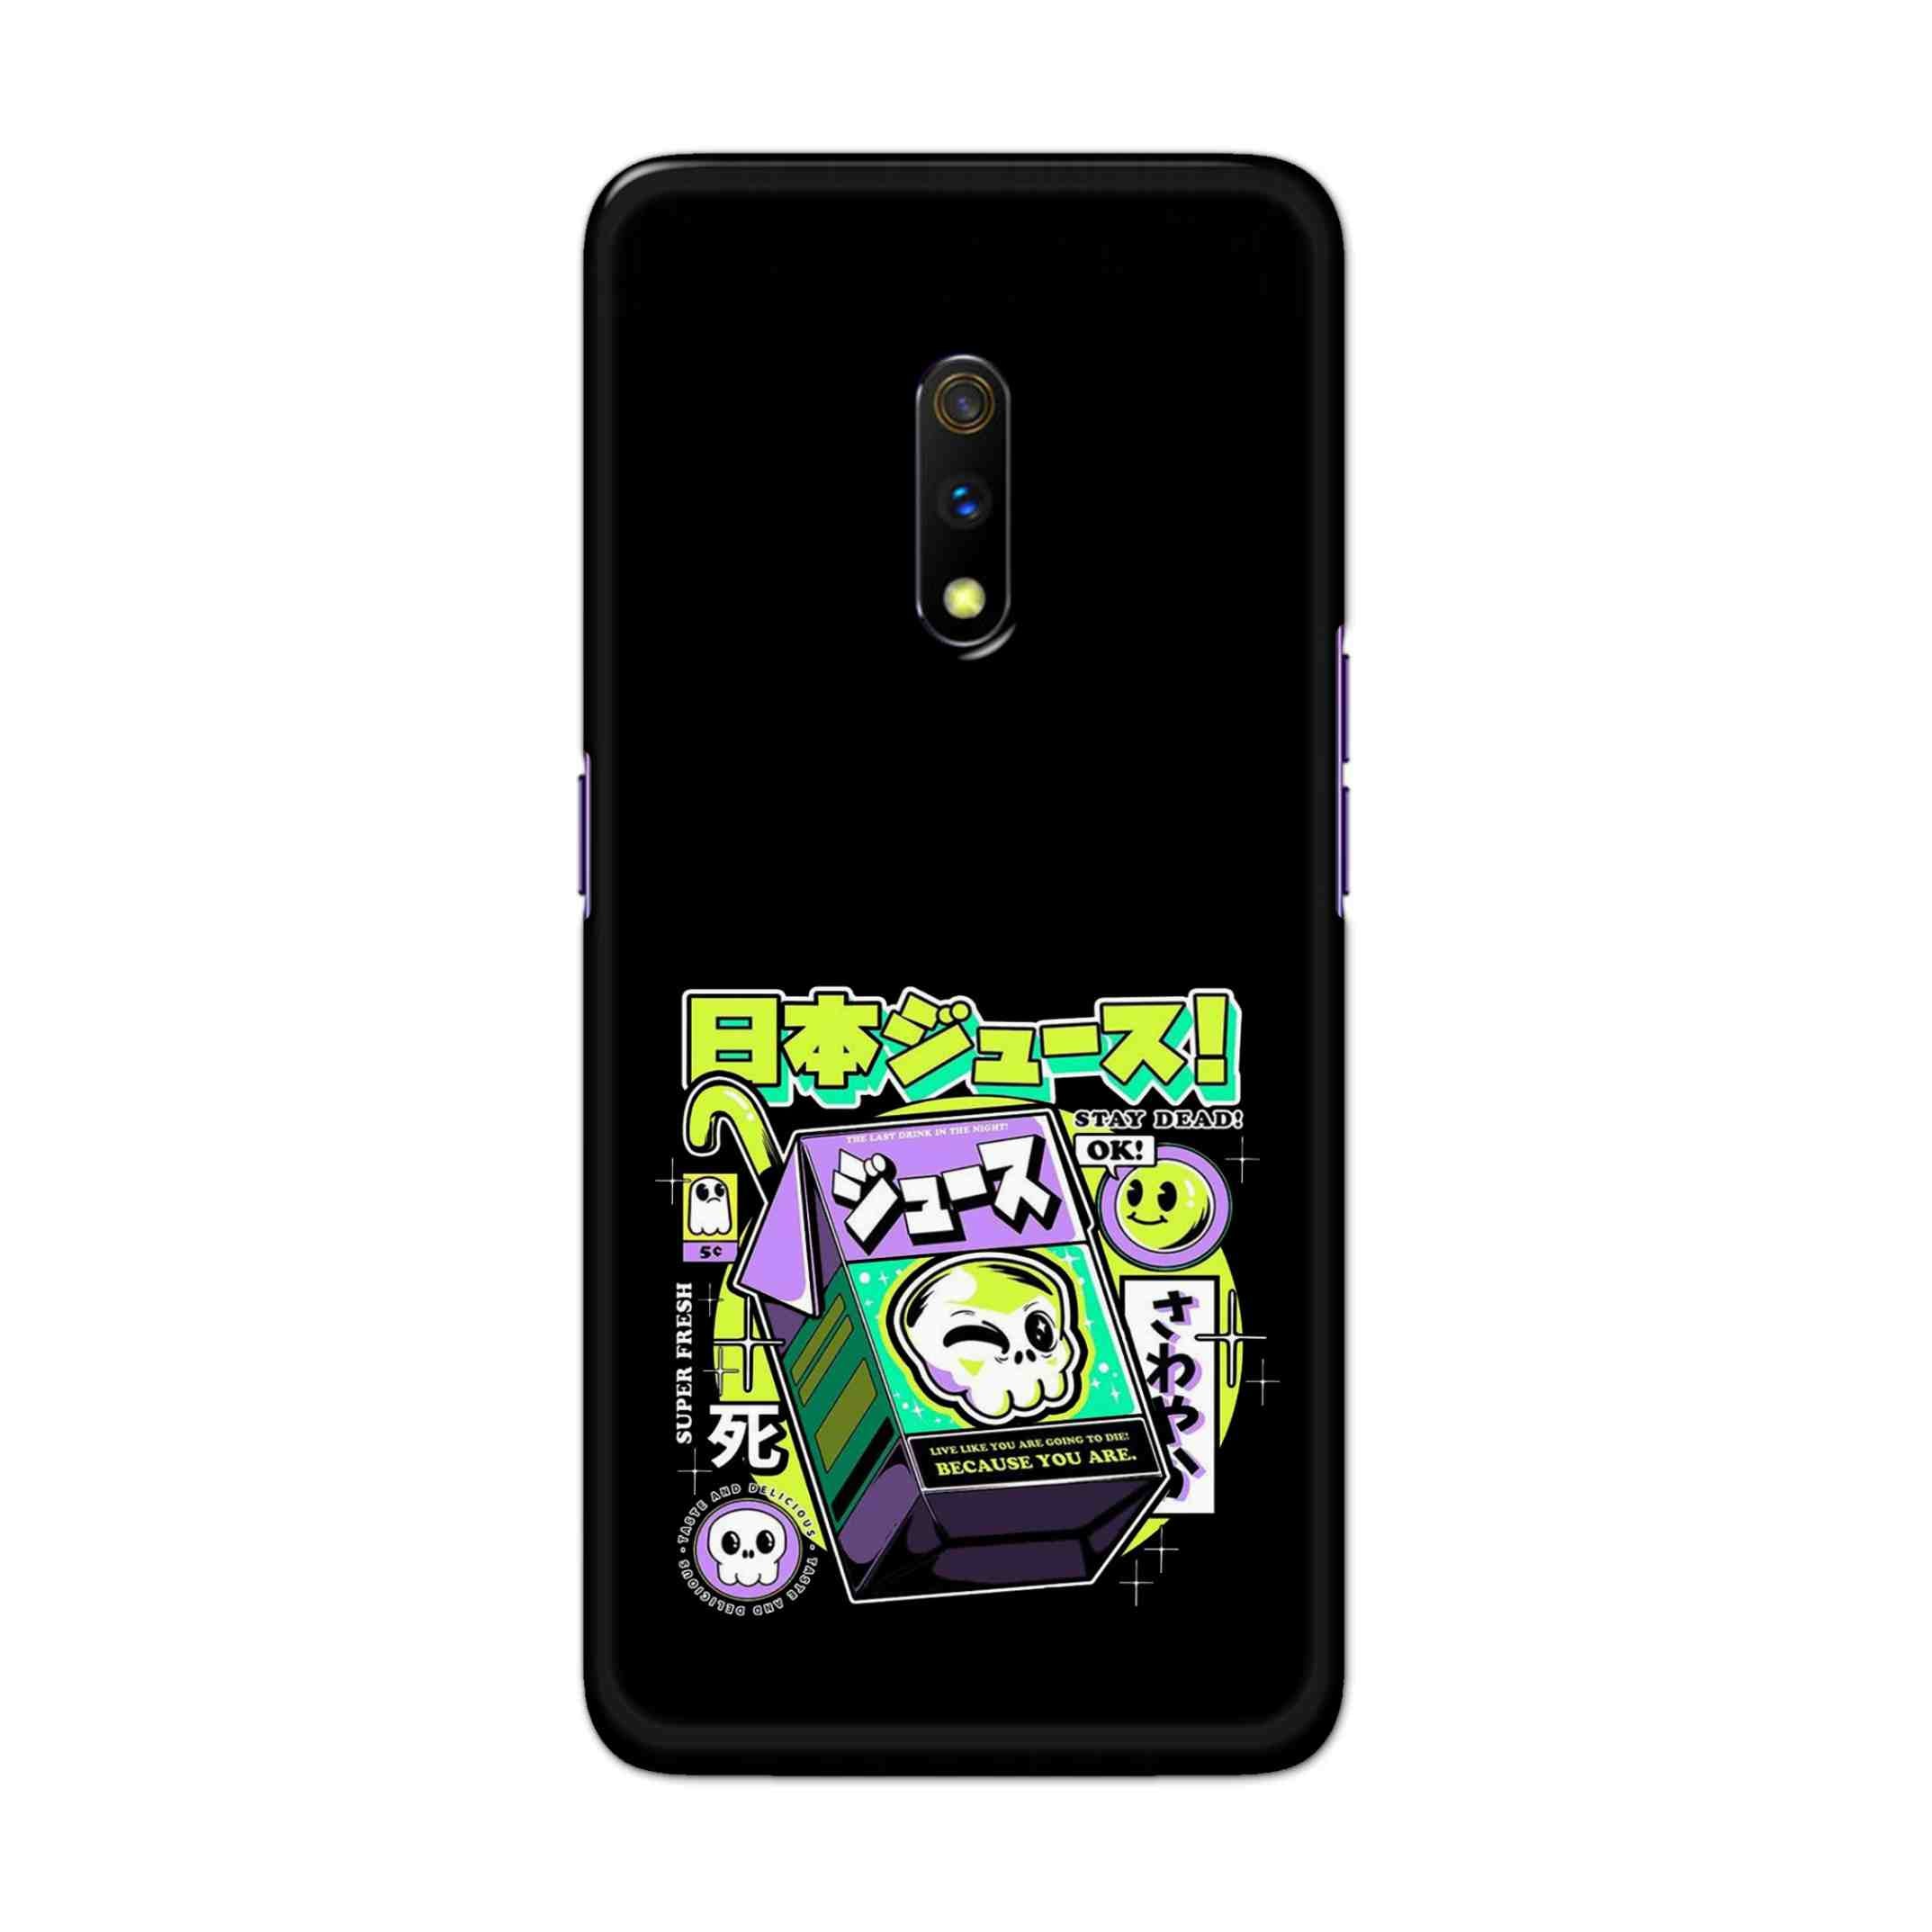 Buy Because You Are Hard Back Mobile Phone Case Cover For Oppo Realme X Online